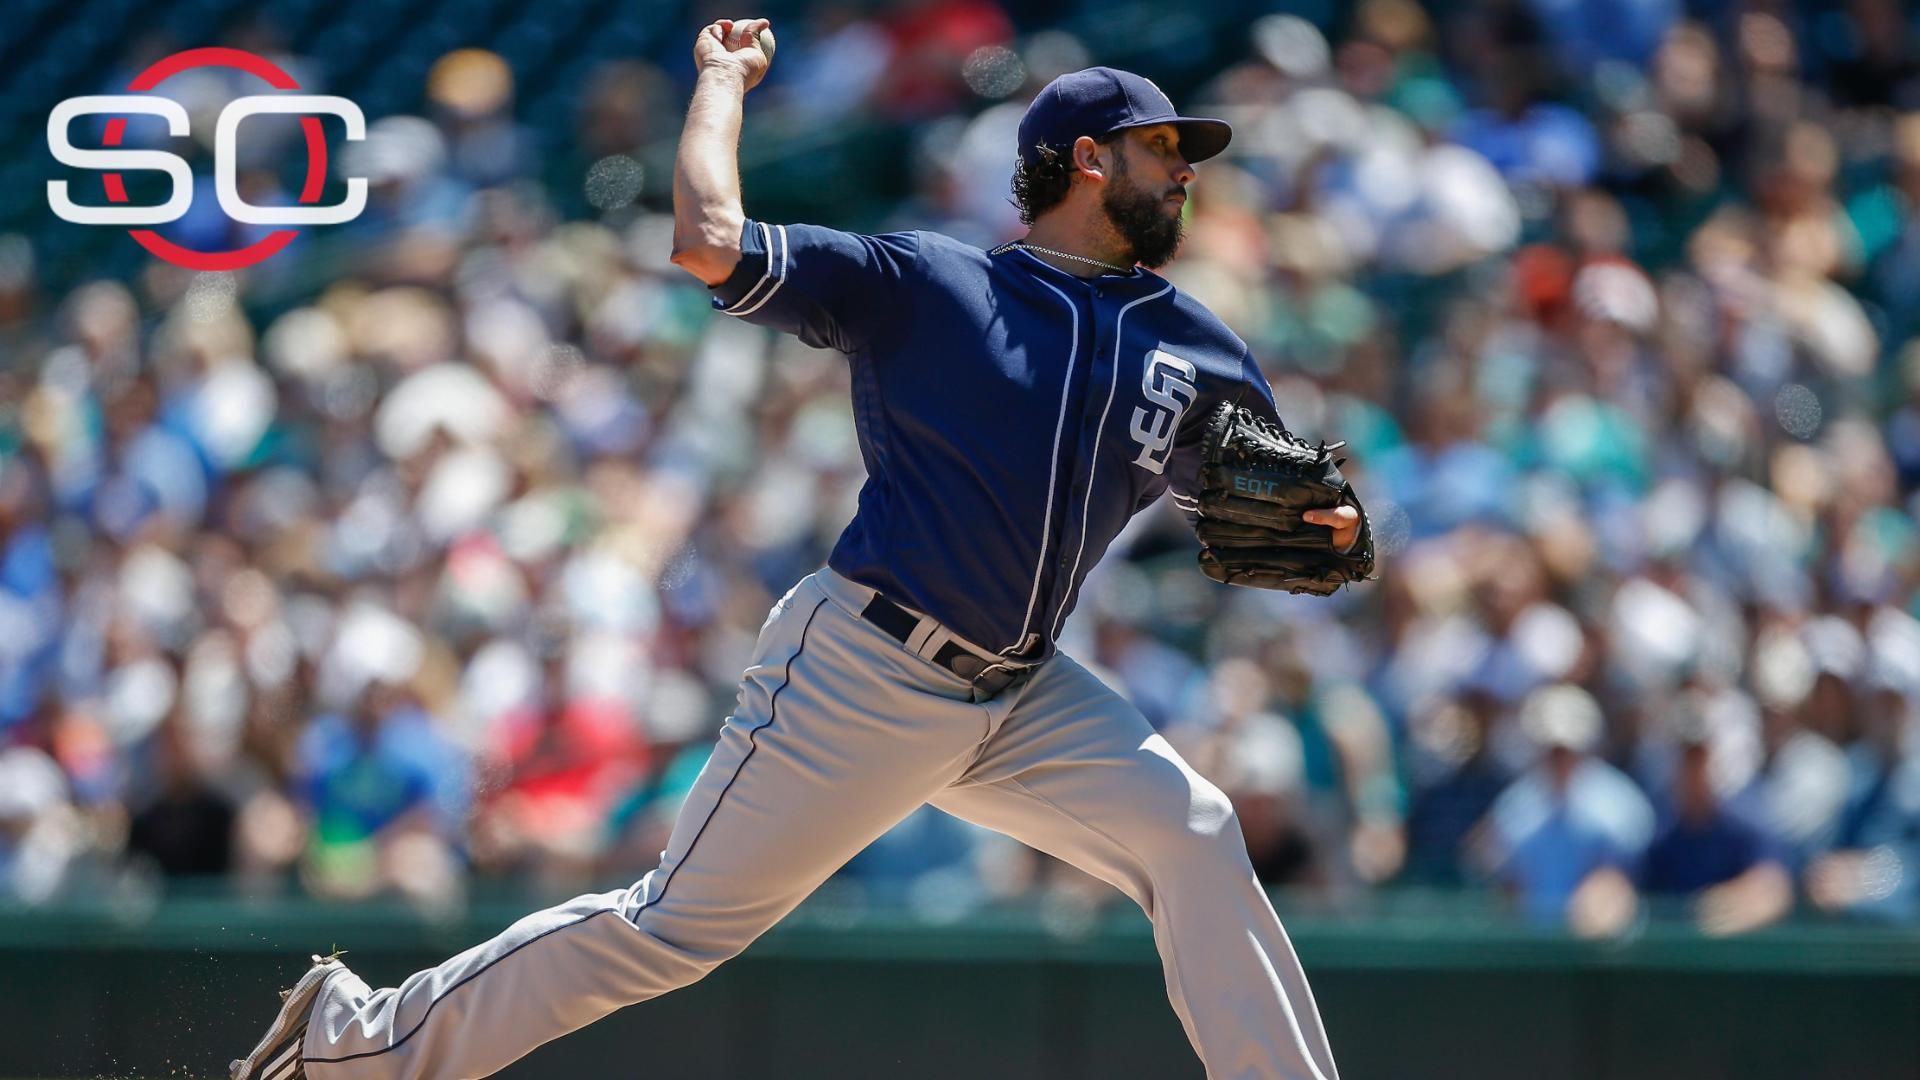 James Shields heading to White Sox in trade | abc30.com1920 x 1080